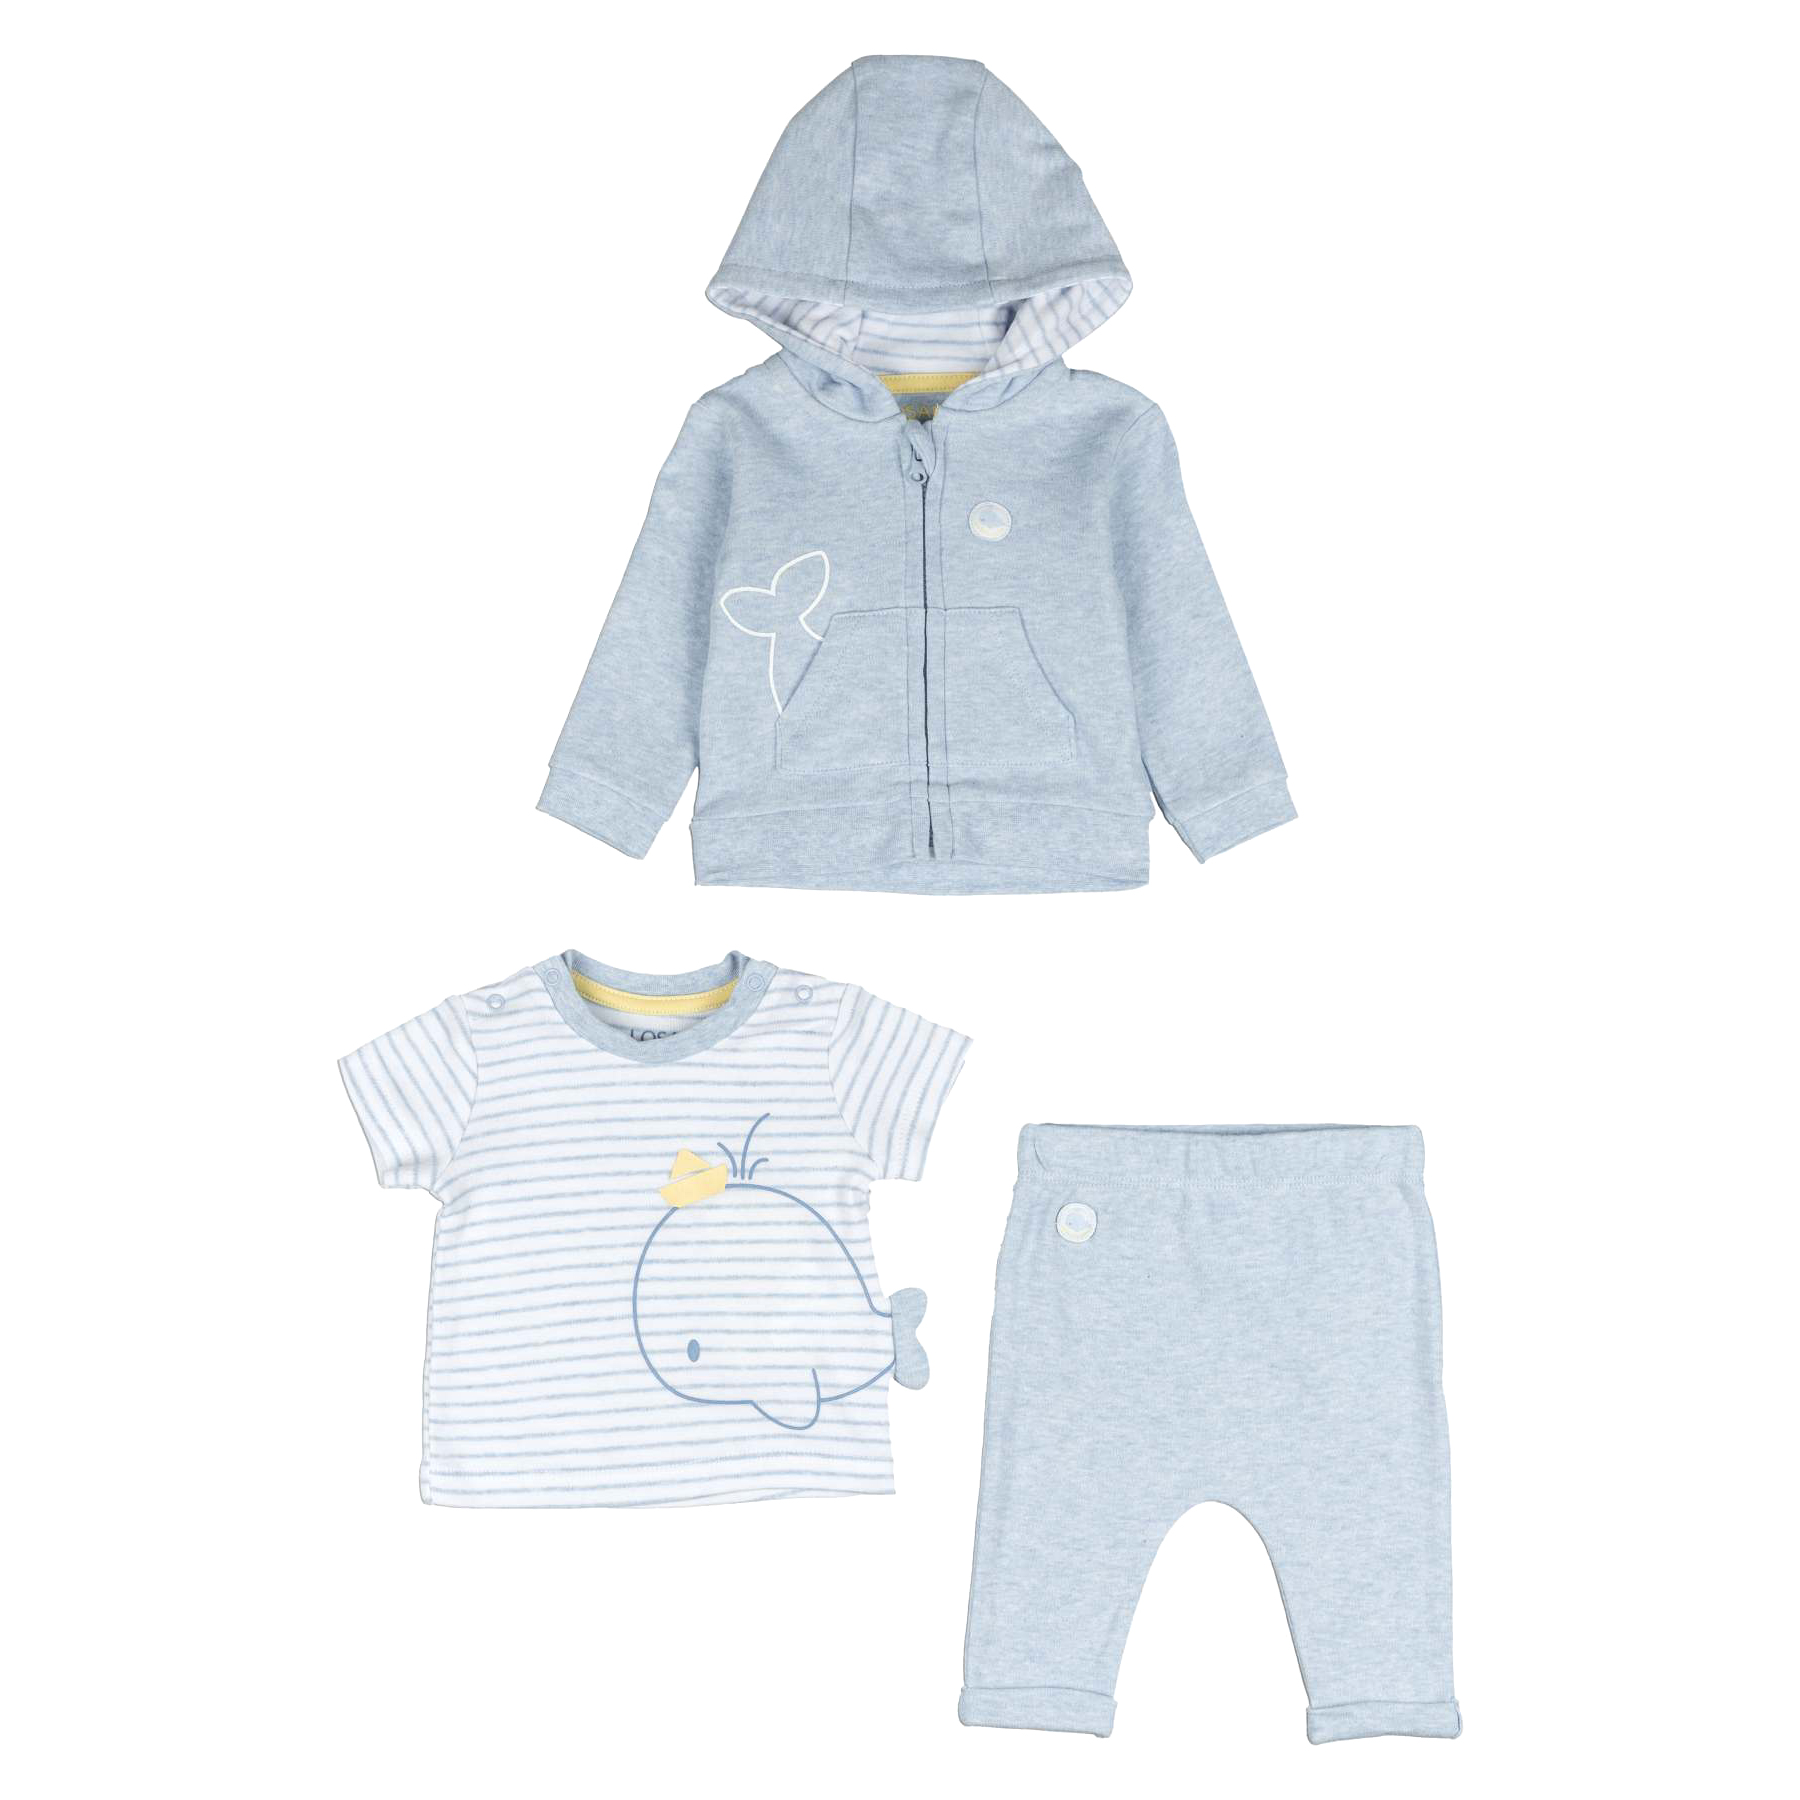 Blue melange lightweight whale hoodie,pants and shirt 1